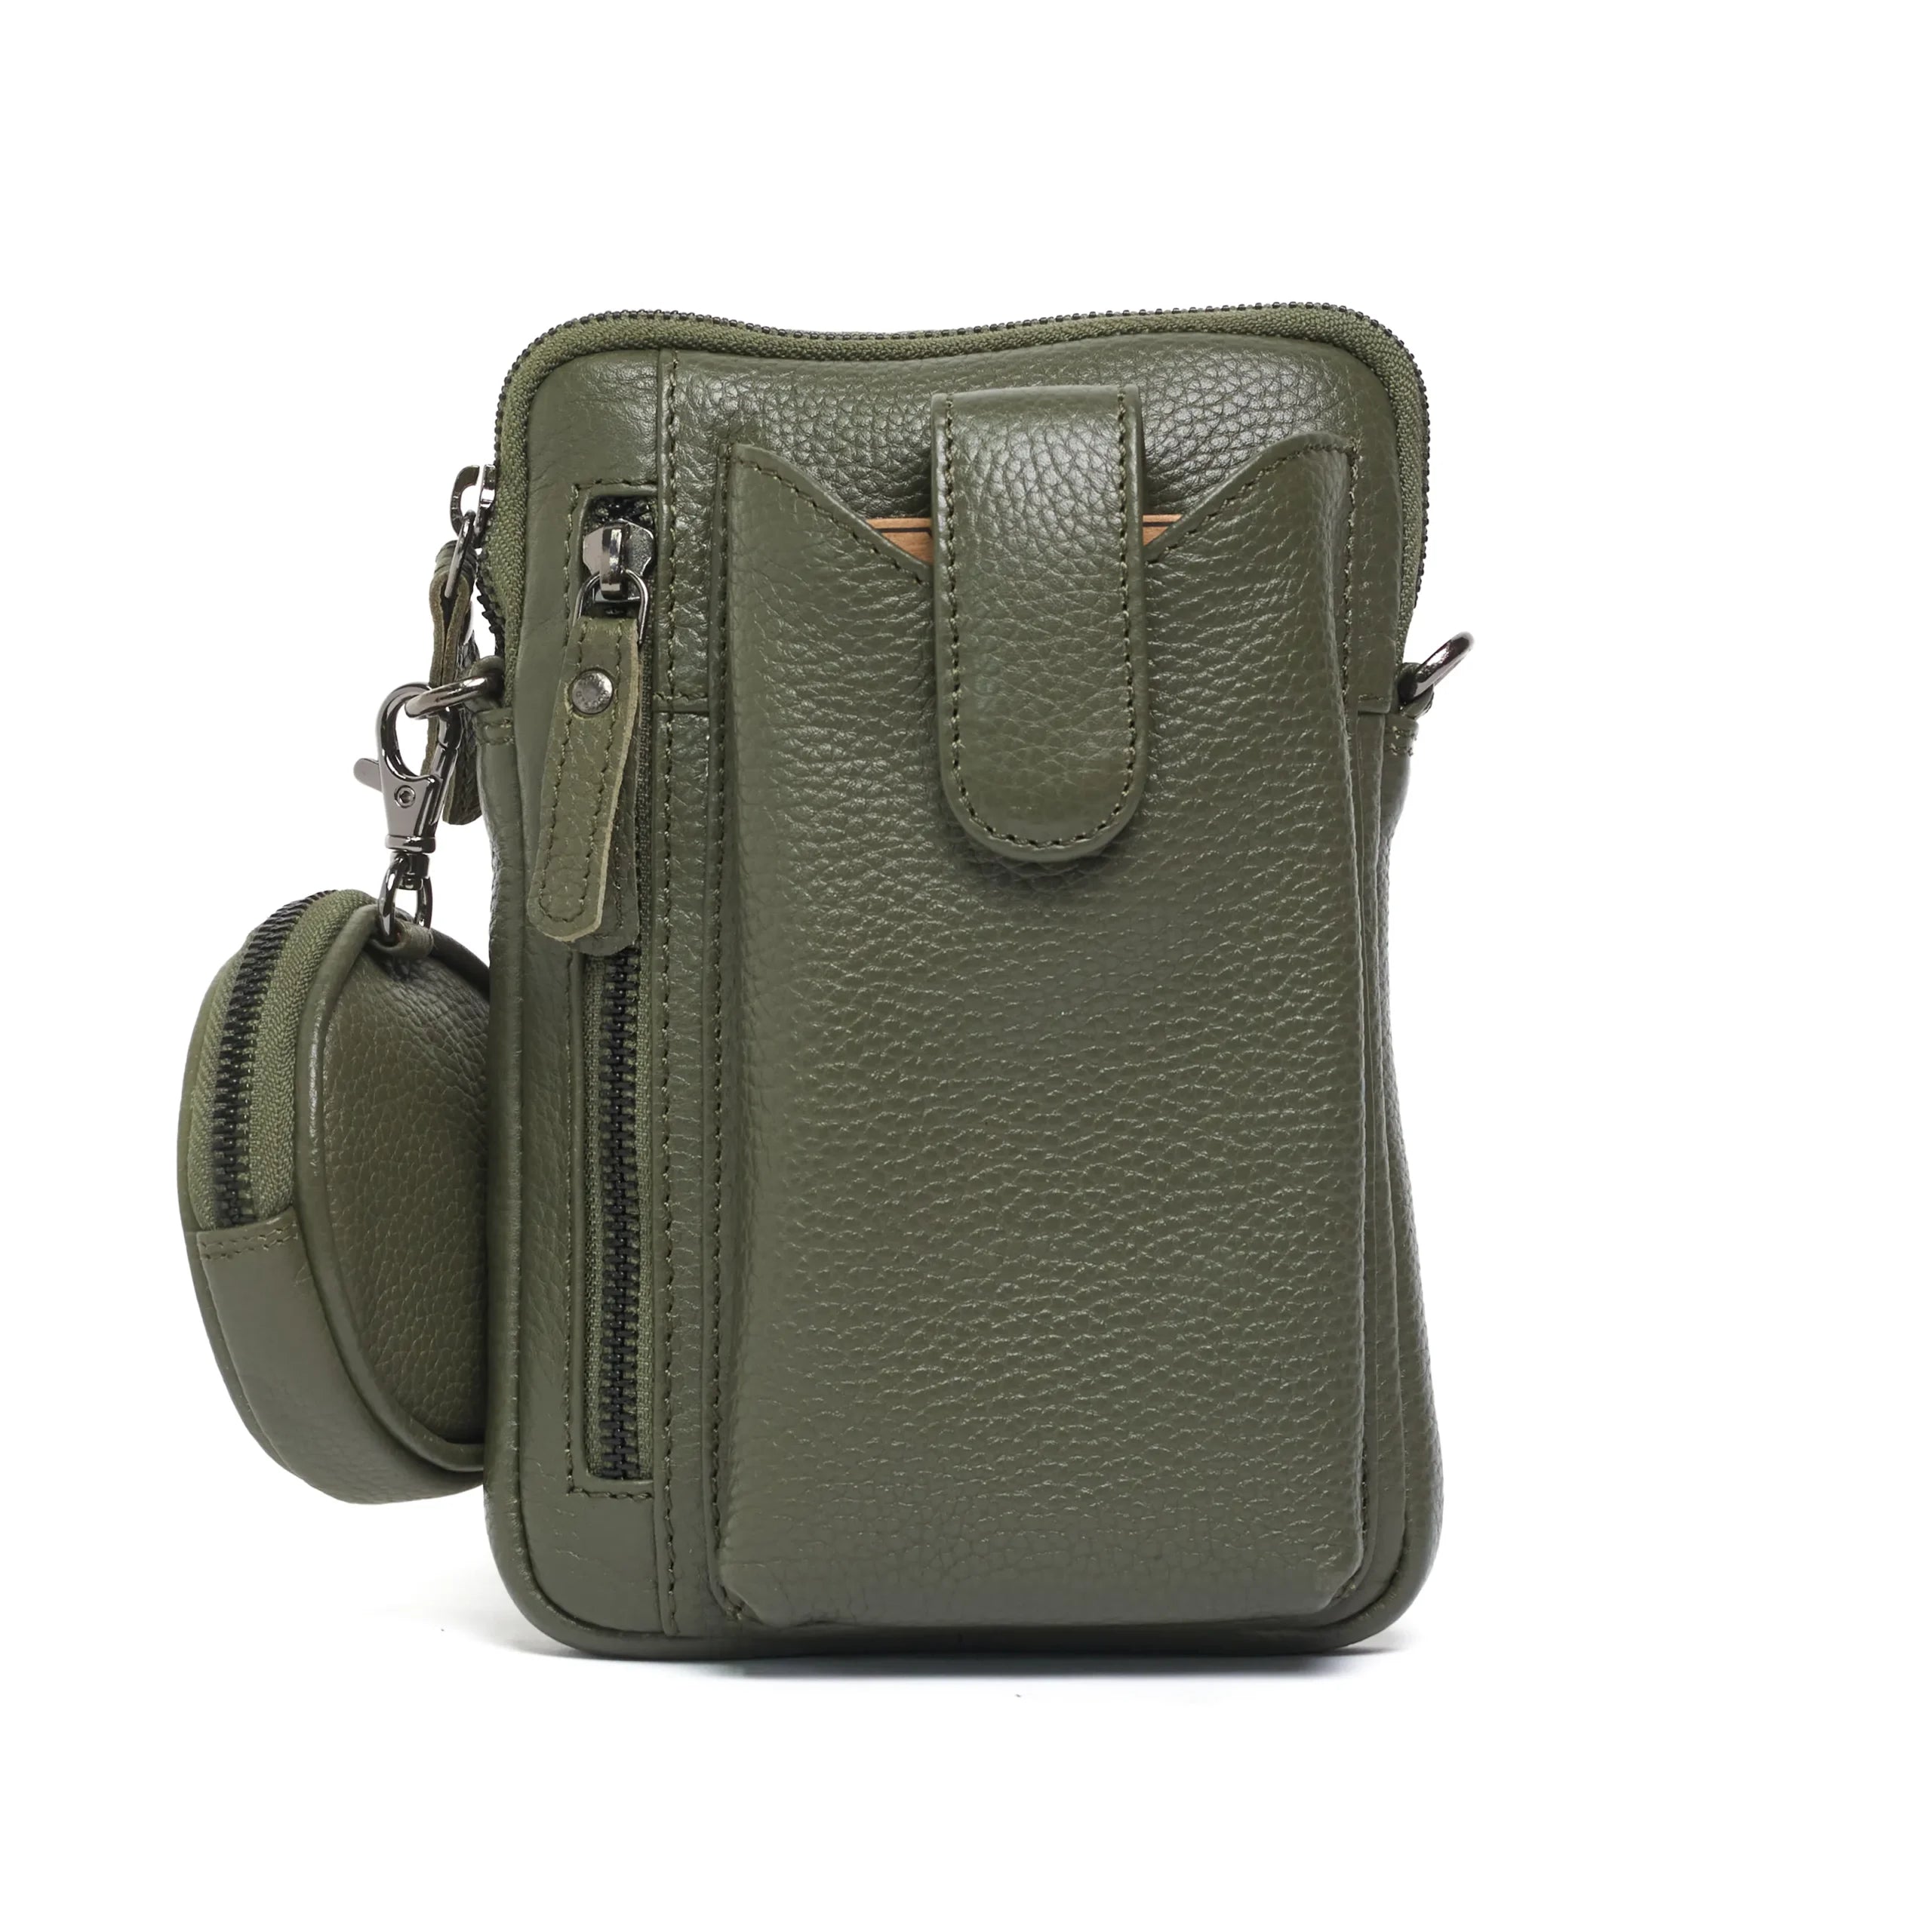 Oran - RH-4915 Sandy Phone bag with removable coin case - Green-1